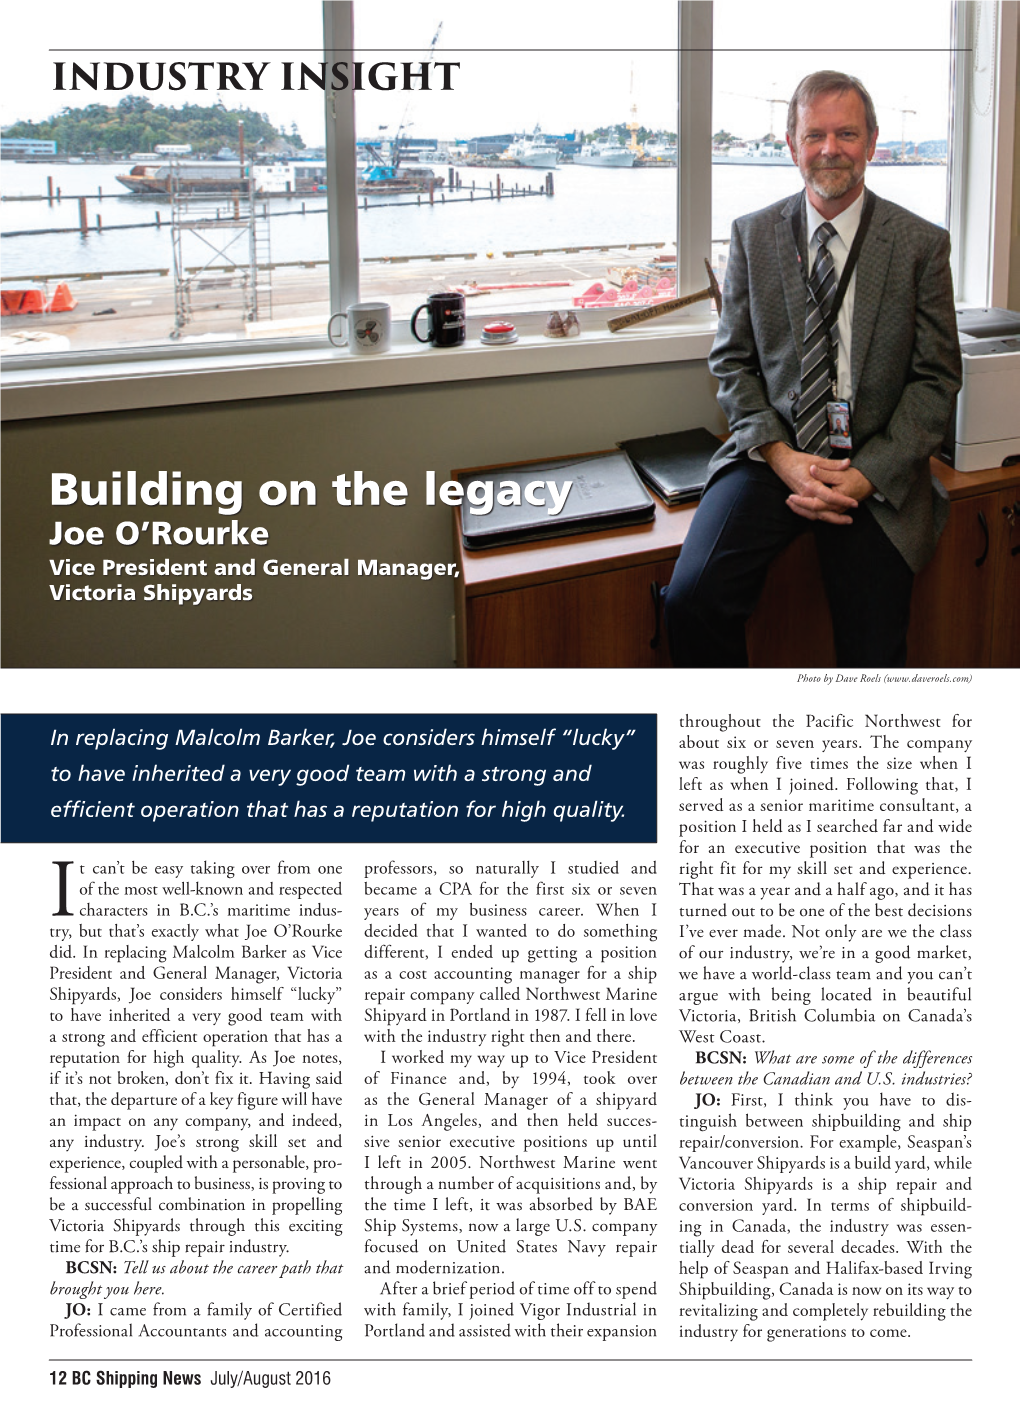 Building on the Legacy Joe O’Rourke Vice President and General Manager, Victoria Shipyards